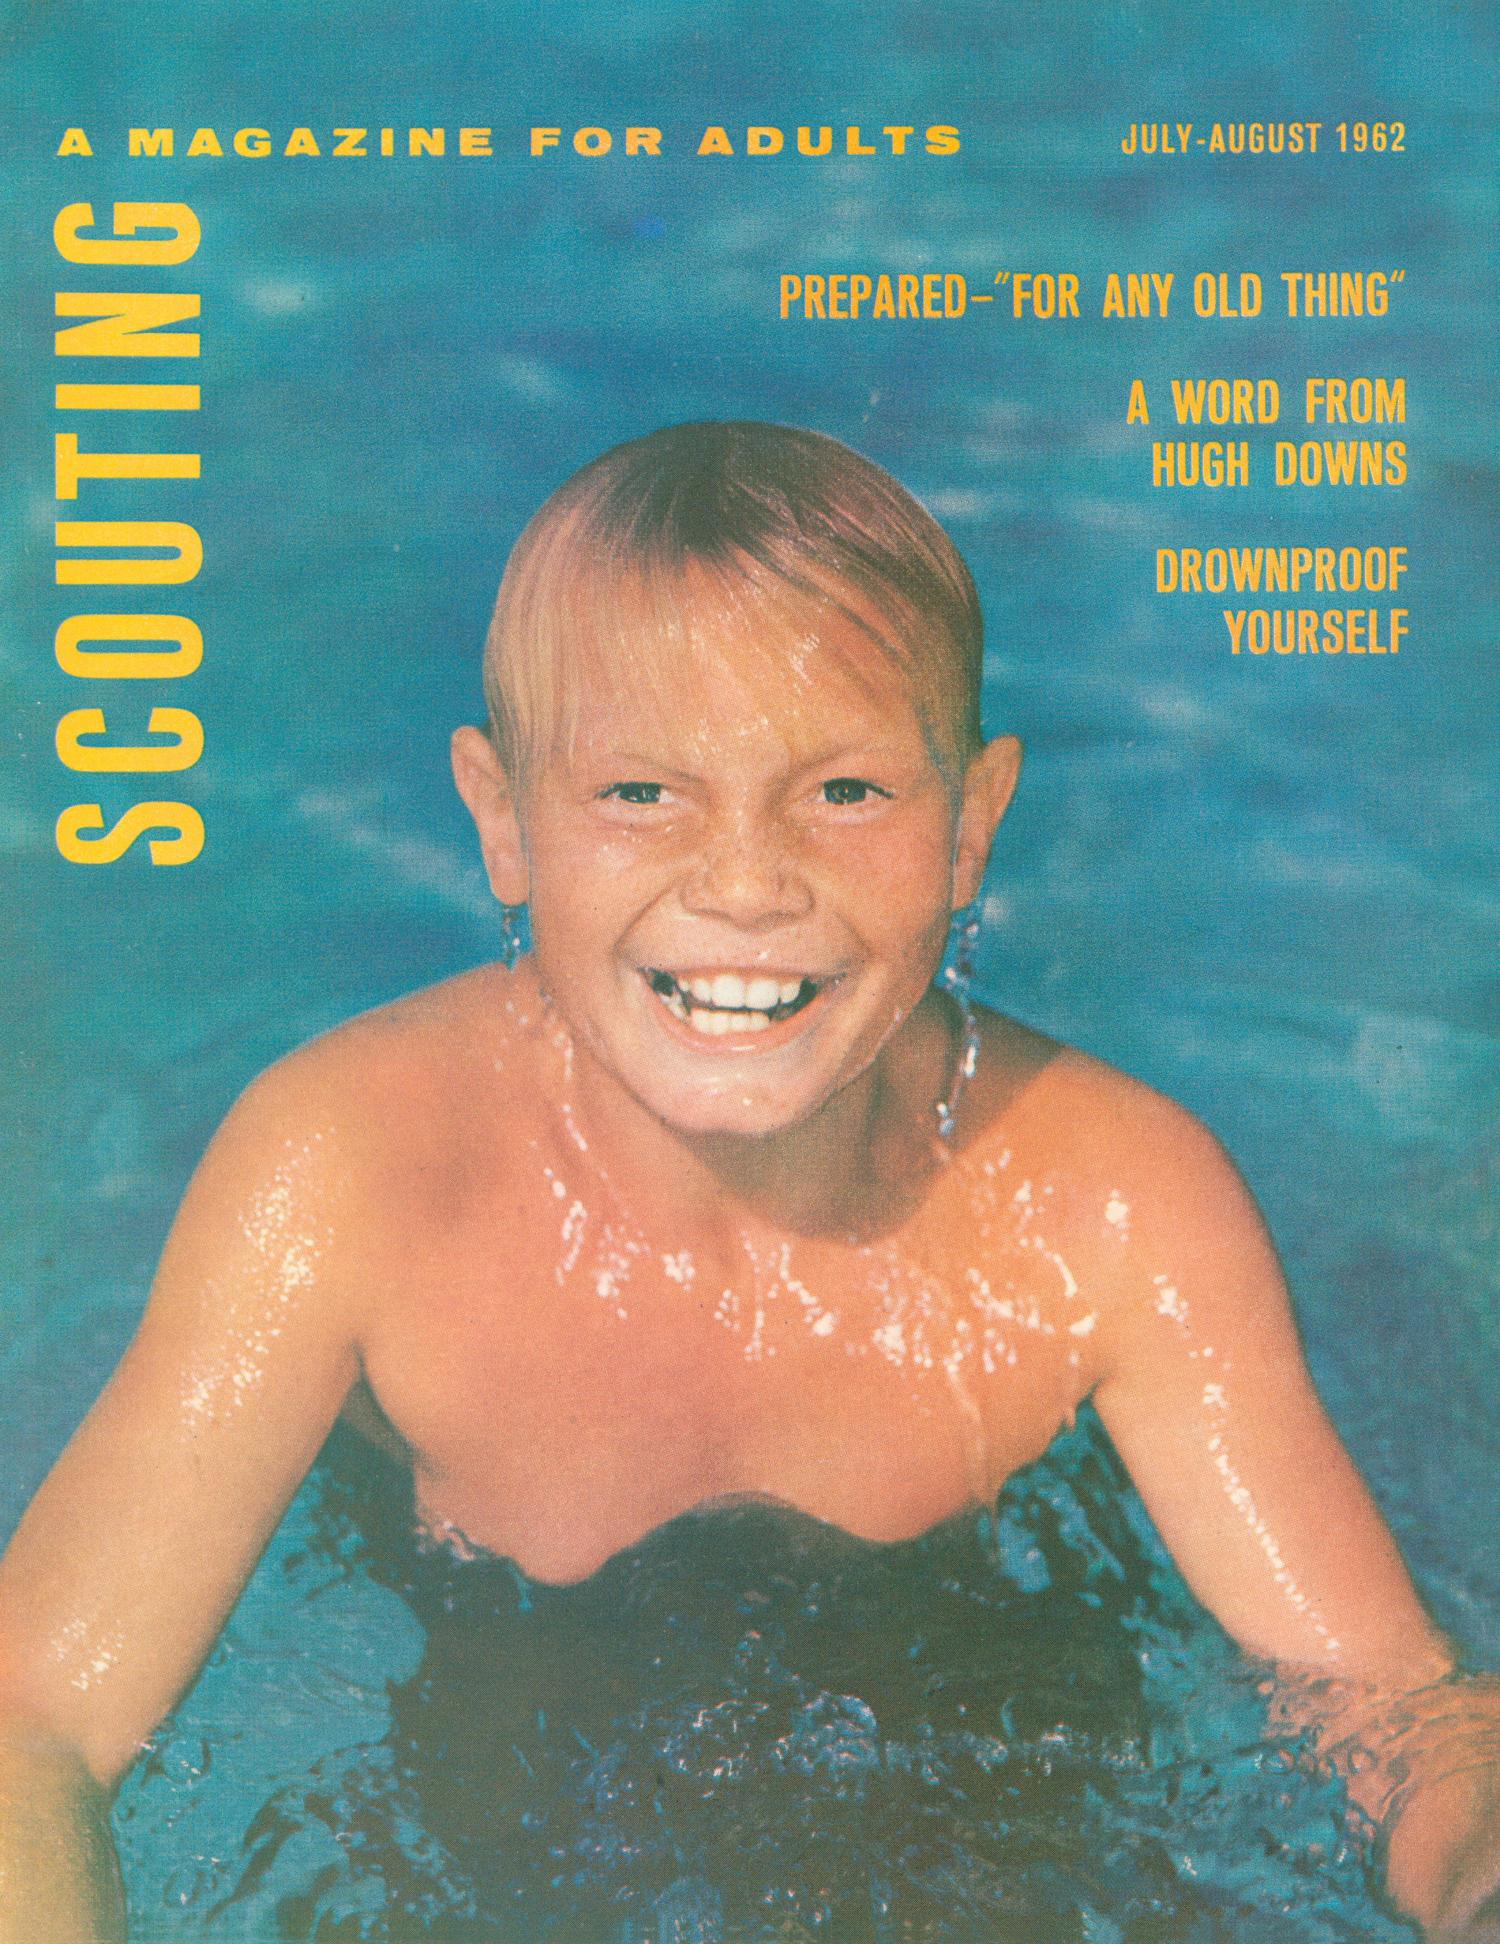 Scouting, Volume 50, Number 6, July-August 1962
                                                
                                                    Front Cover
                                                